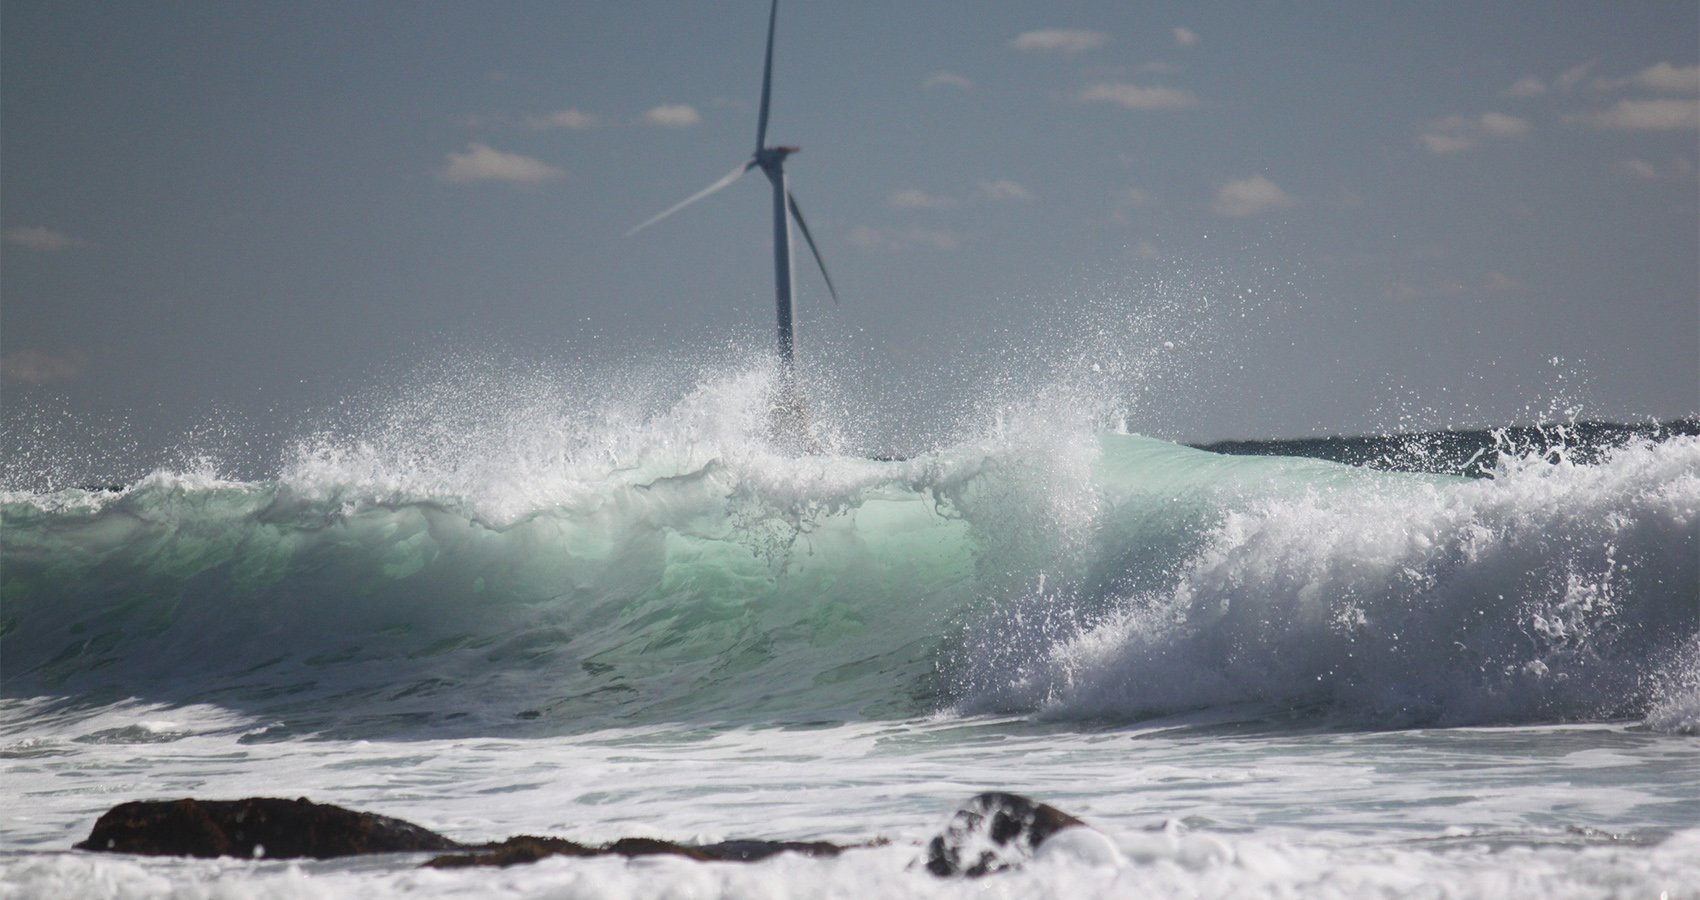 Offshore wind provides the solution for sustainable energy